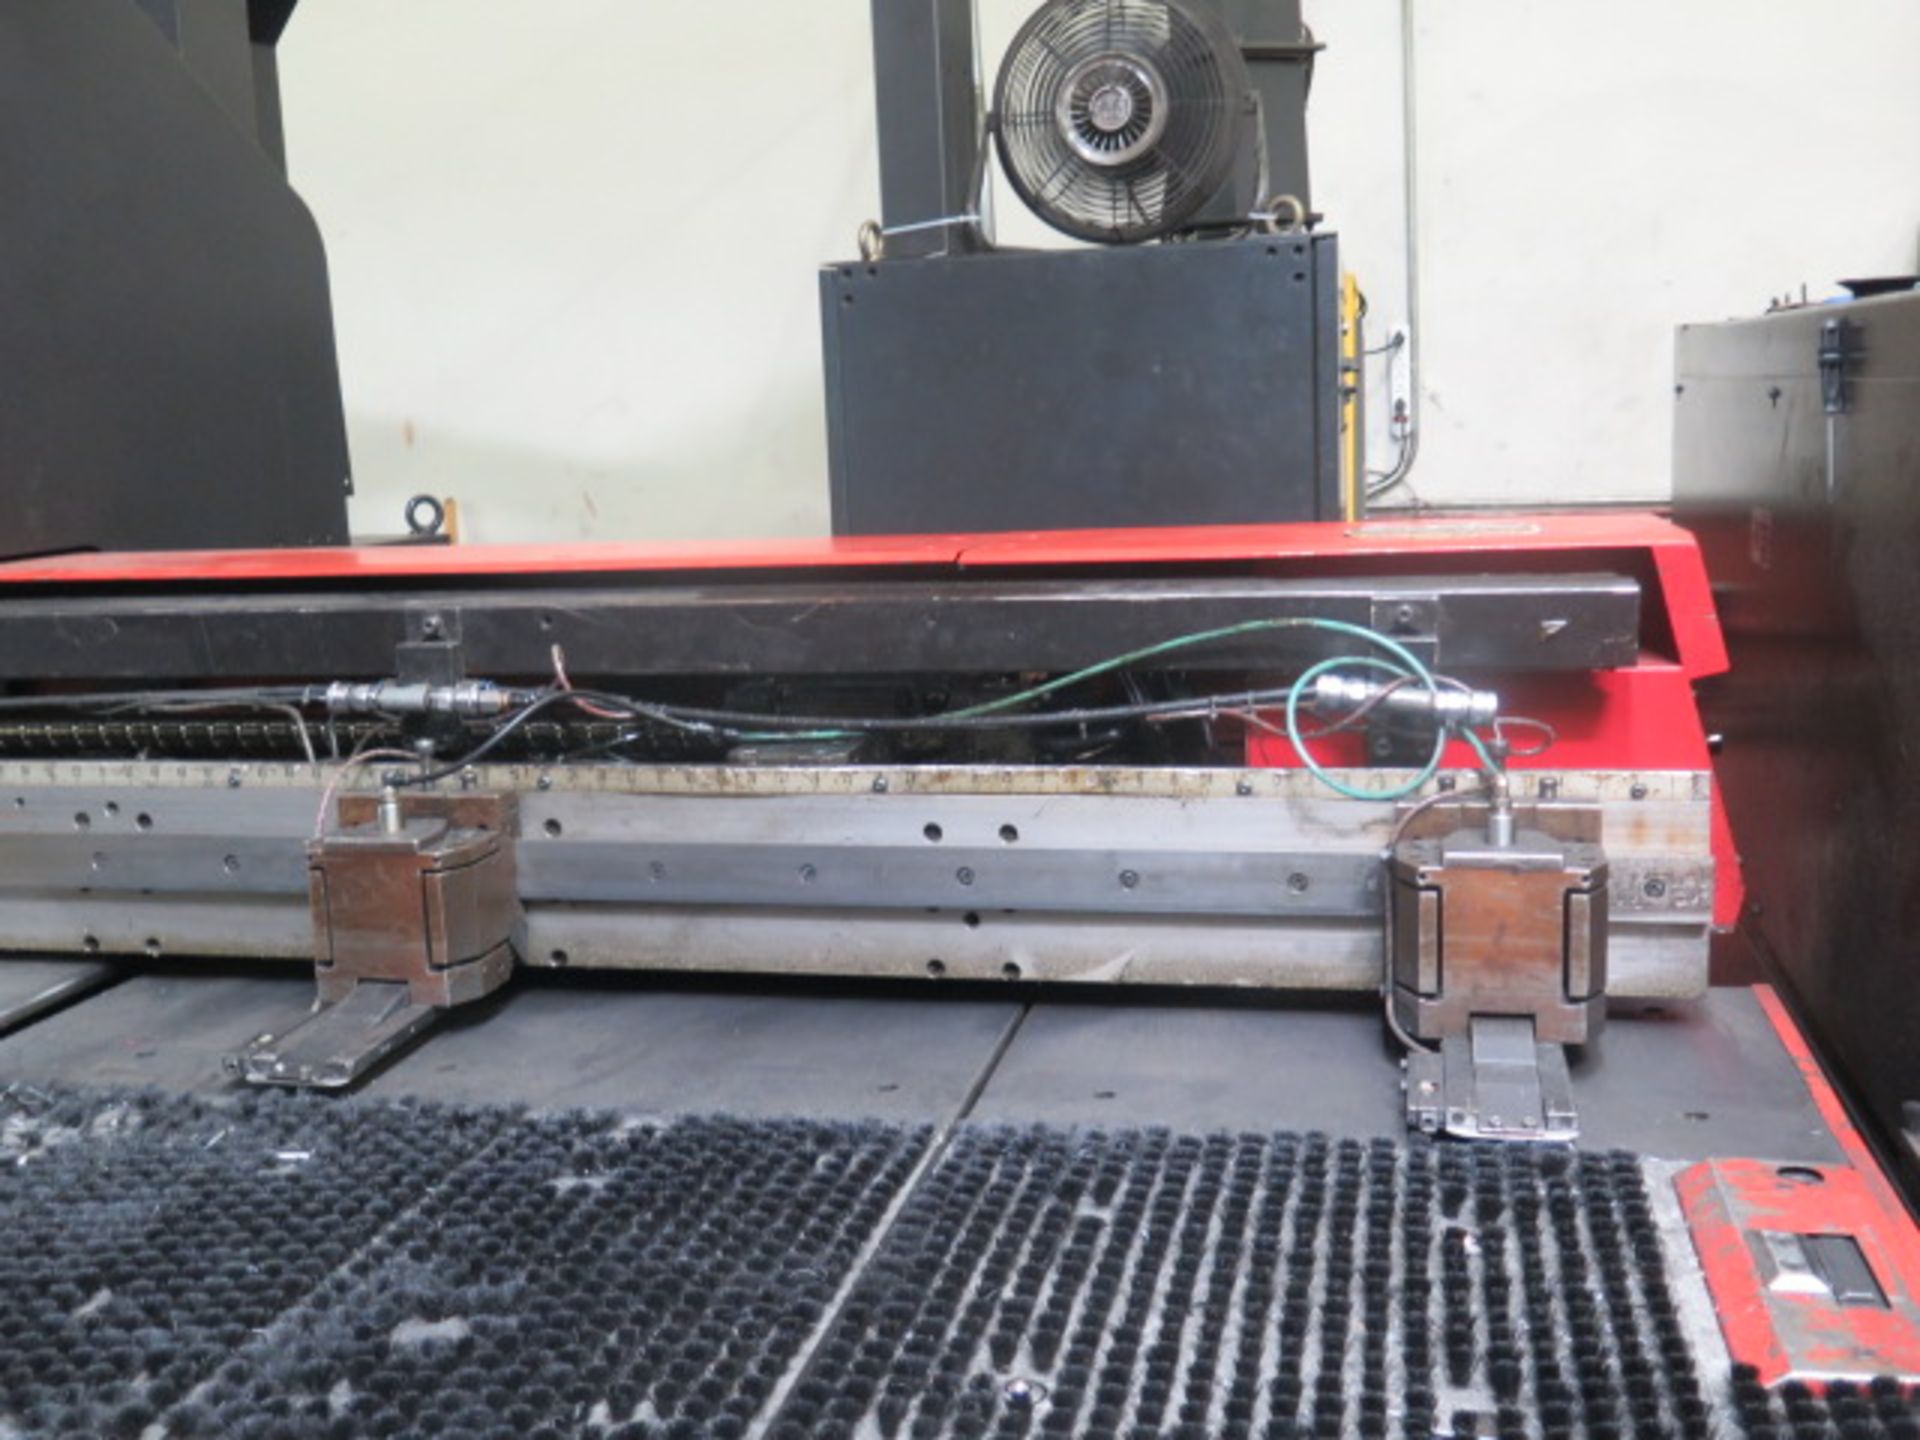 1998 Amada VIPROS 357 QUEEN 30 Ton CNC Turret Punch Press s/n 35730345 w/ O4P-C Controls, SOLD AS IS - Image 6 of 30